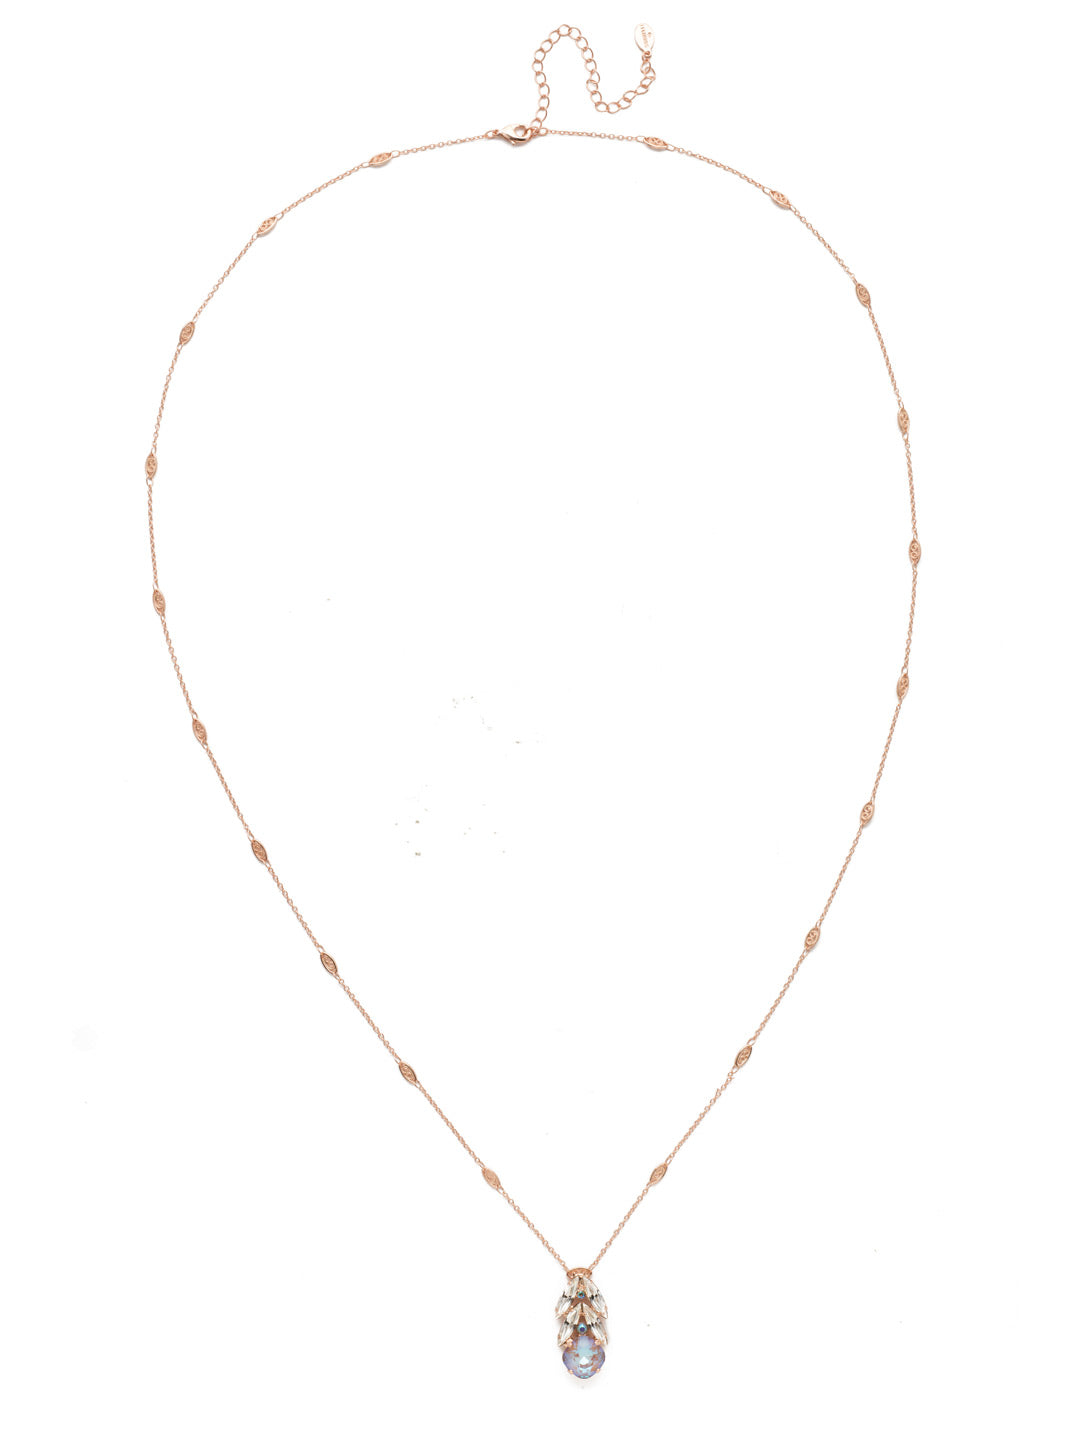 Hannah Pendant Necklace - NEN19RGROG - <p>The Hannah Pendant Necklace is style and grace. The dripping sparkles of navette crystals around a circular center hang from a delicate metal strand that's a beauty in its own right. From Sorrelli's Rose Garden  collection in our Rose Gold-tone finish.</p>